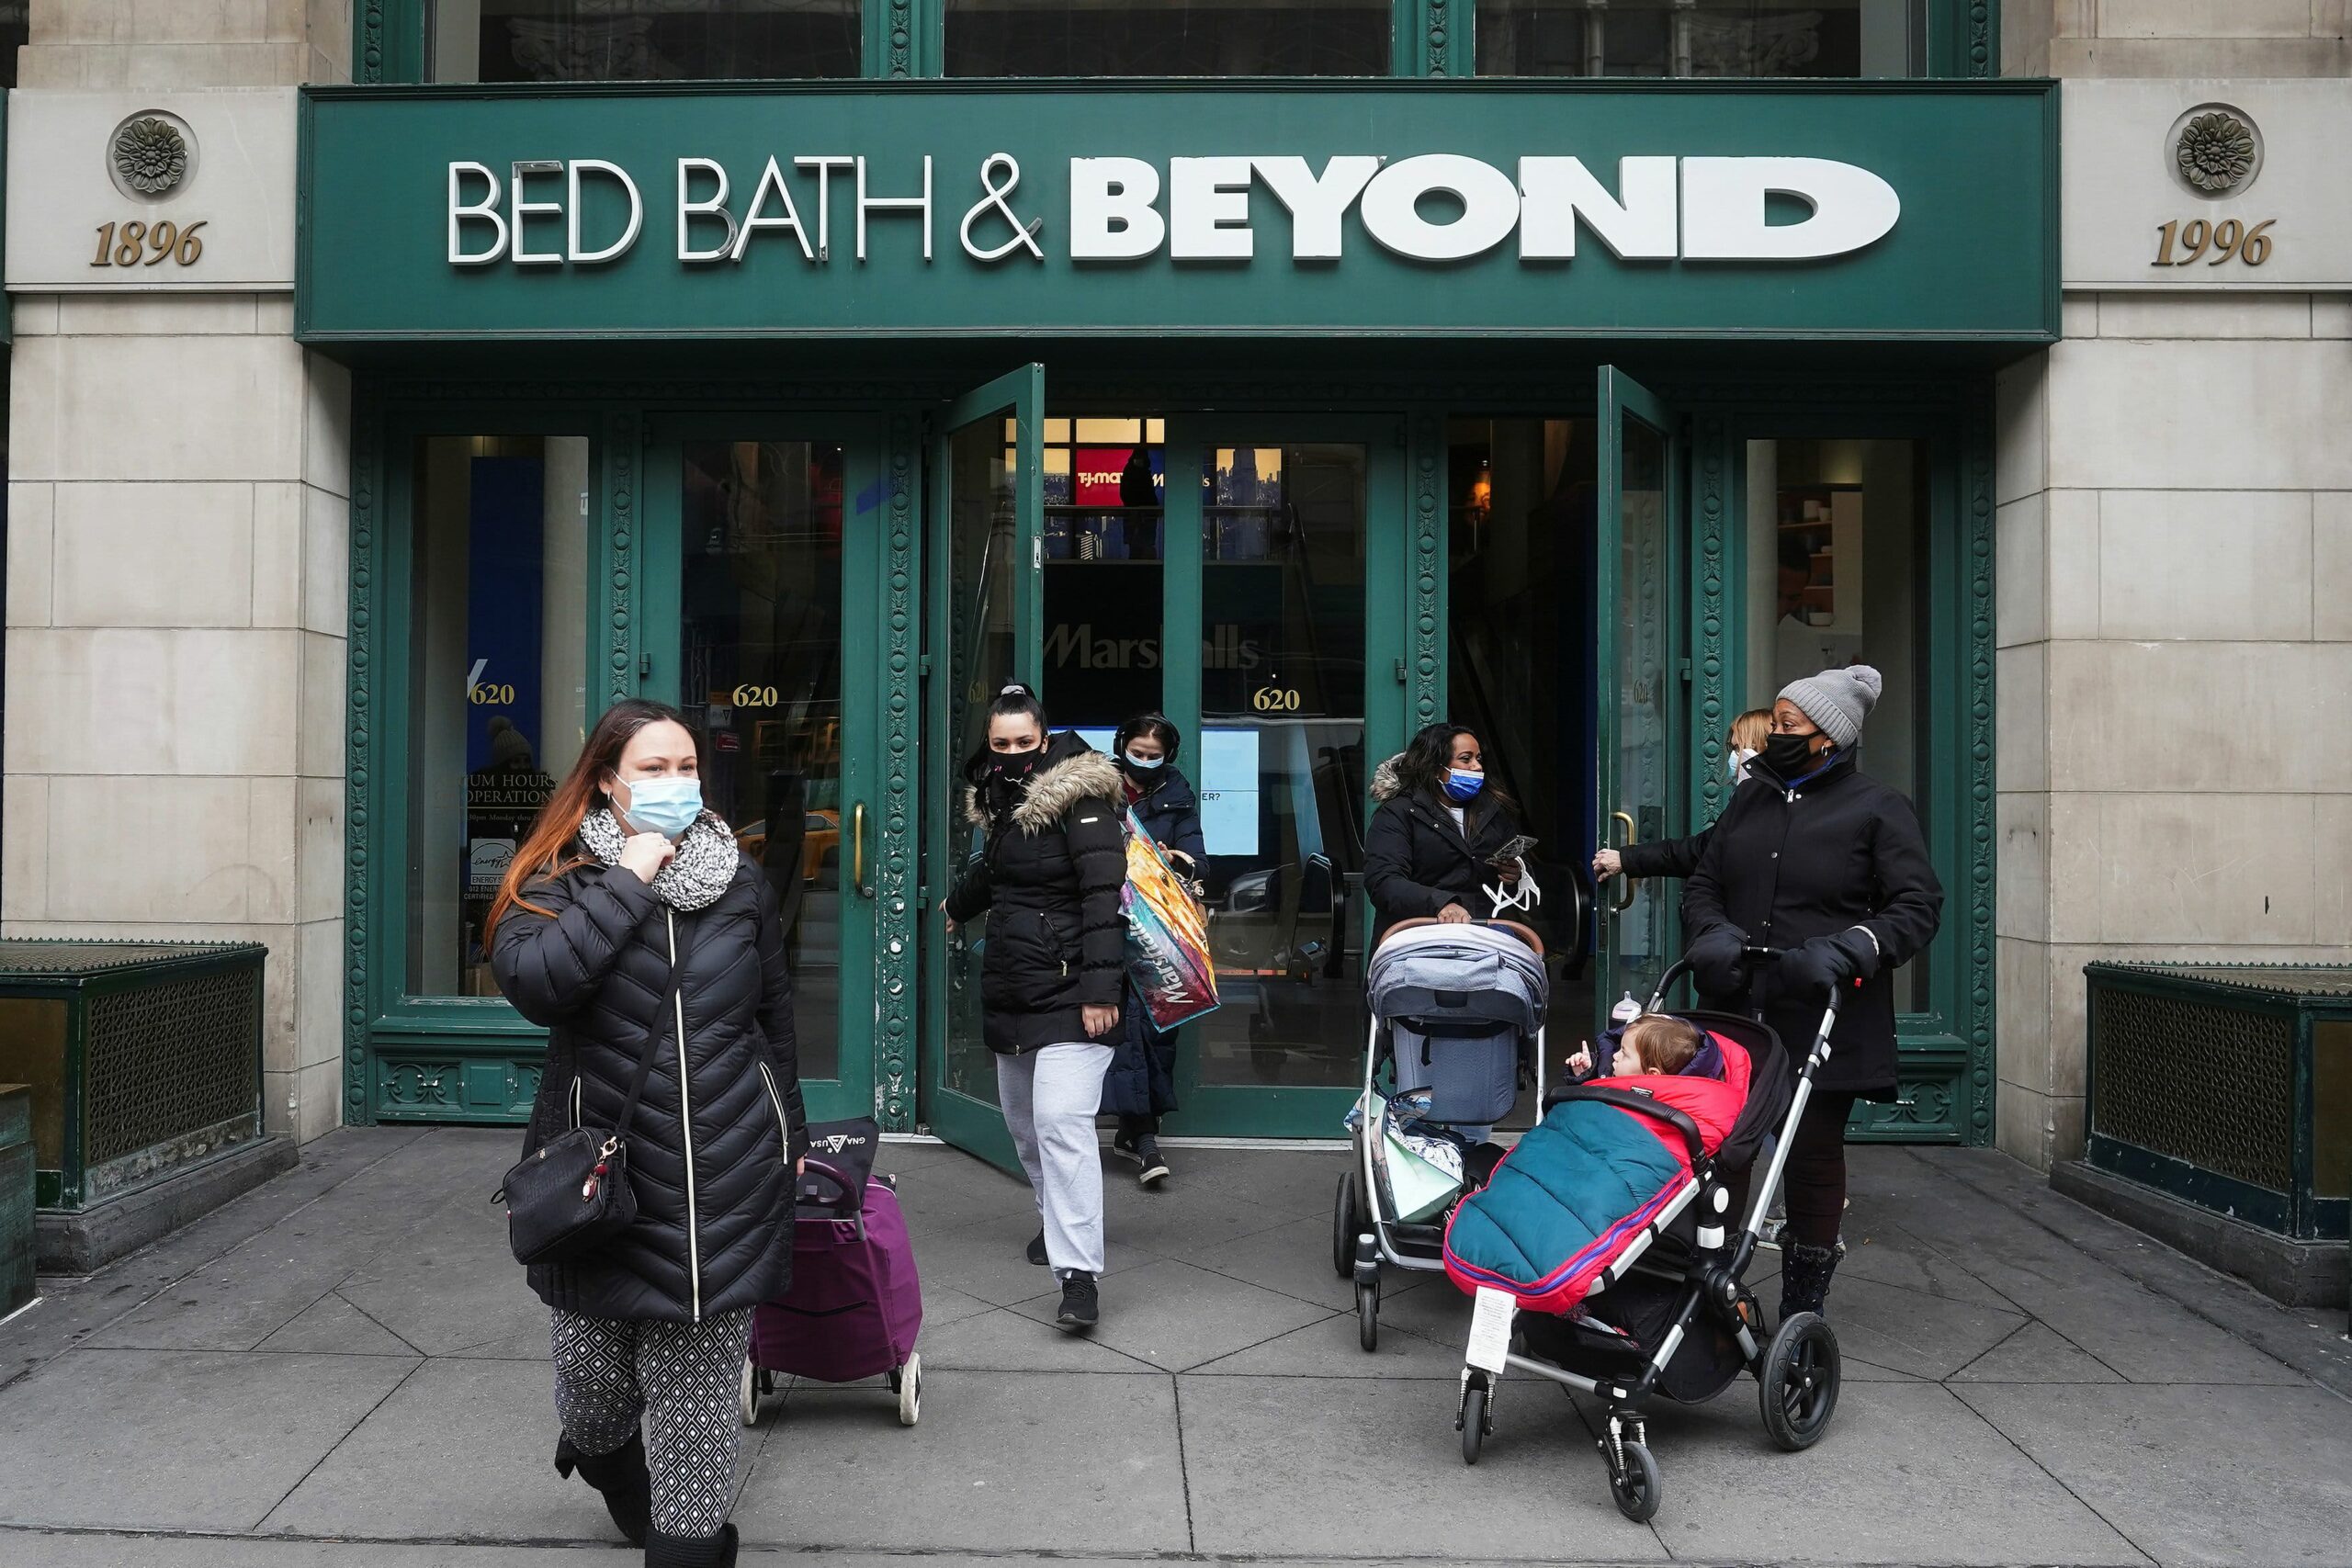 Bed Bath & Beyond (BBBY) shares tank on supply chain issues